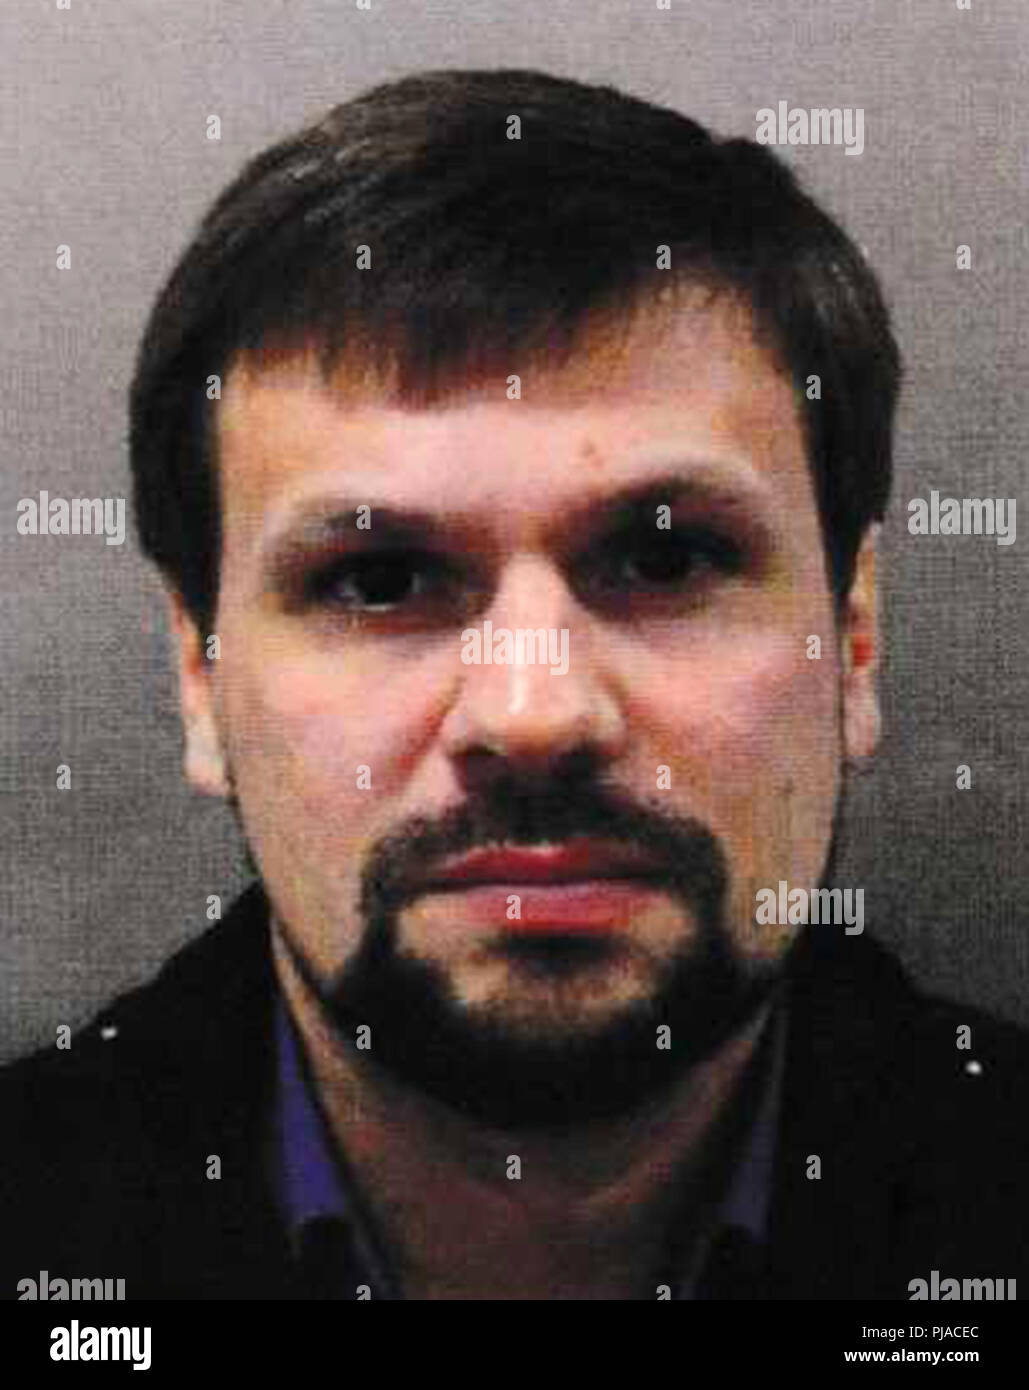 Russian national Ruslan Boshirov, aged about 40, wanted in direct connection with the Salisbury Novichok attack and Amesbury investigation. Police have today released these pictures of the suspects. Images released by and copyright of Metropolitan Police Credit: Met Police via Dorset Media Service/Alamy Live News Stock Photo